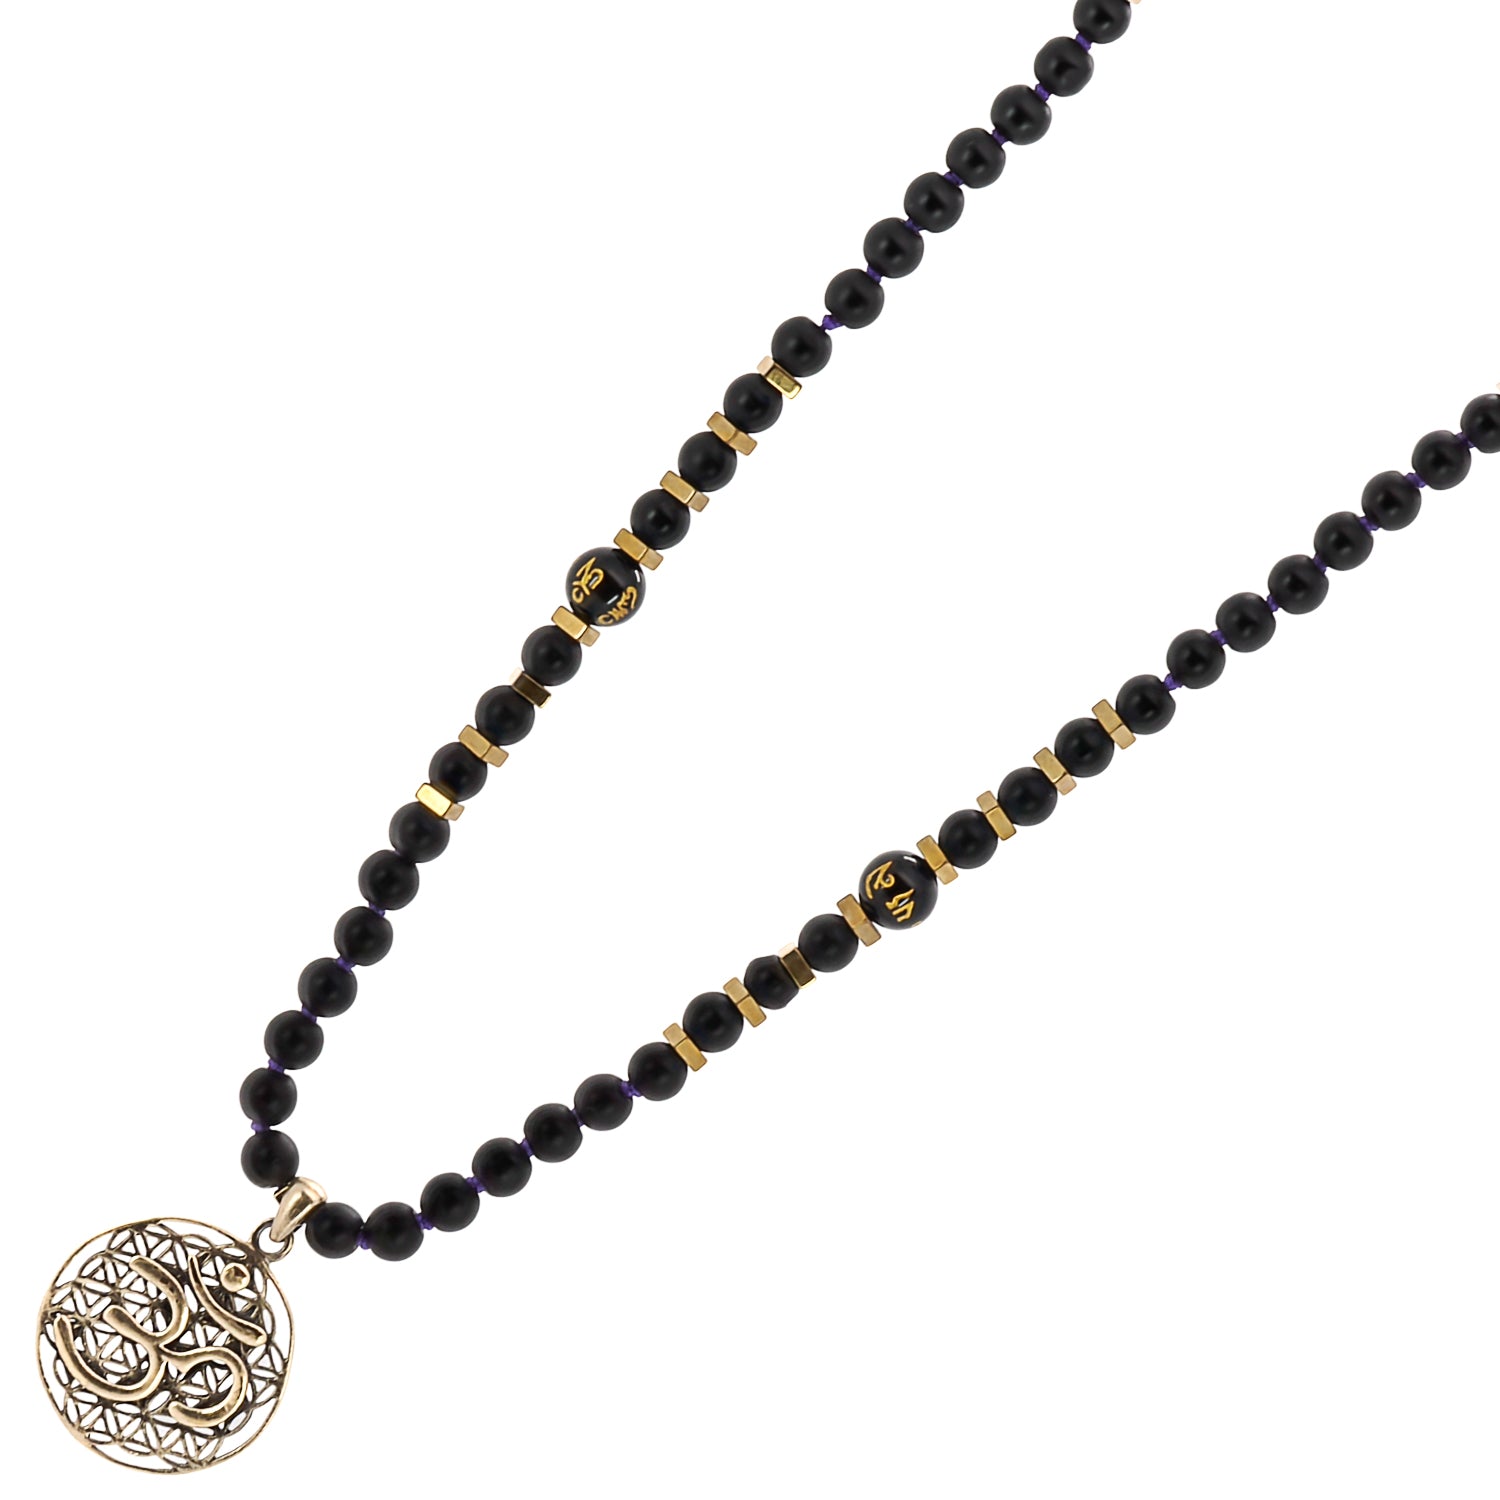 The grounding and protective properties of the black onyx stone beads in the necklace